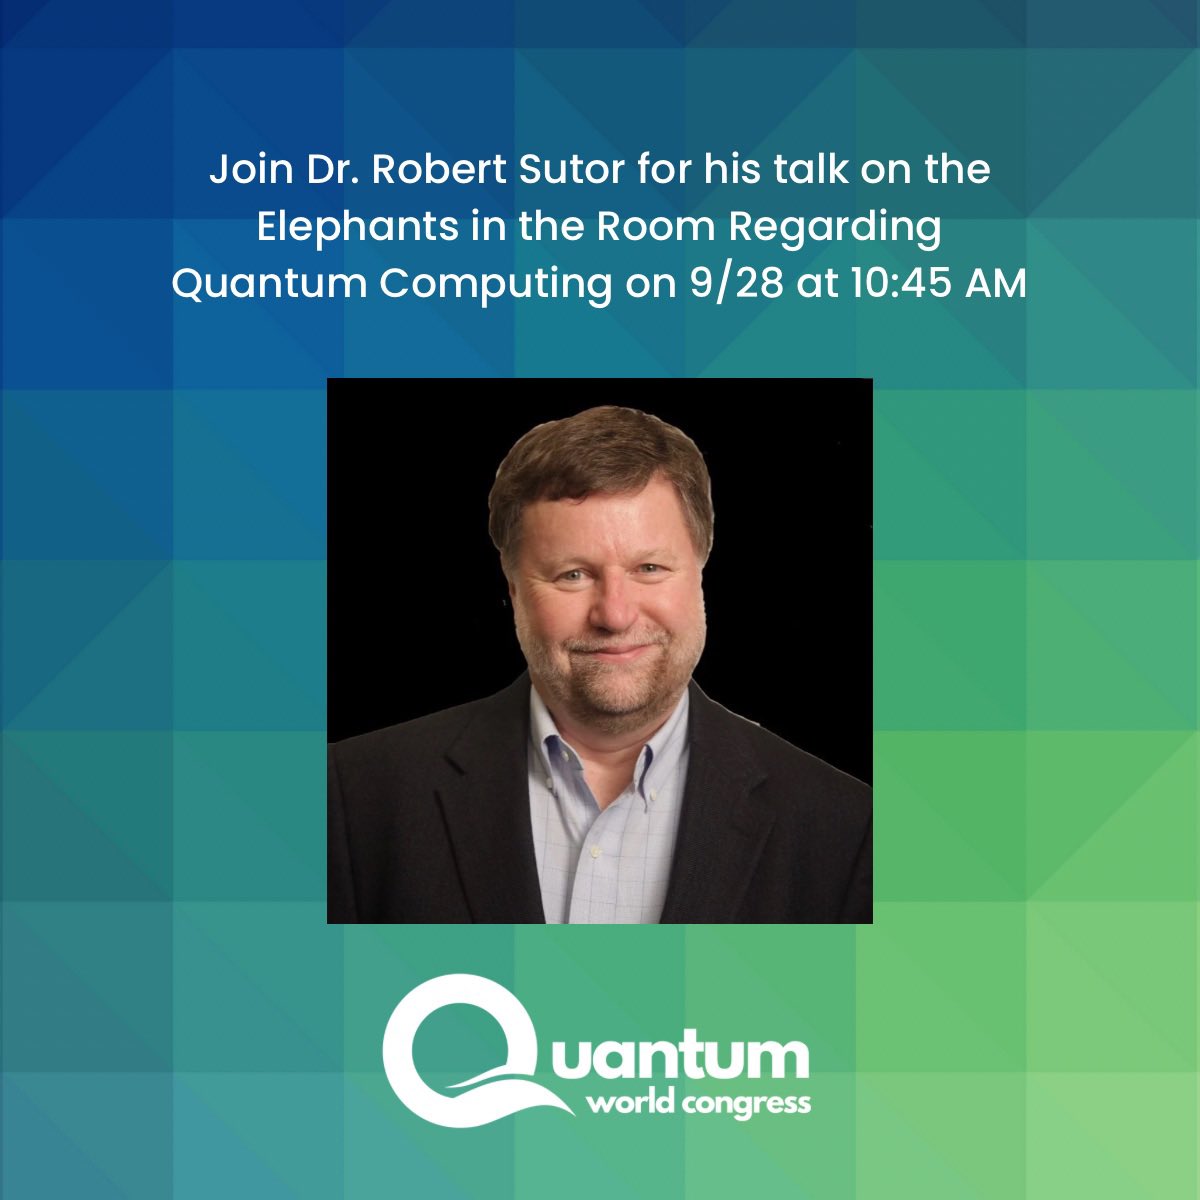 Don't miss Dr. Robert Sutor, VP & Chief Quantum Advocate, addressing the #ElephantsInTheRoom when it comes to #QuantumComputing at Quantum World Congress in The Vault on Thursday, 9/28, at 10:45 AM 🐘🧐

#QWC2023 @QWCevent @ConnectedDMV